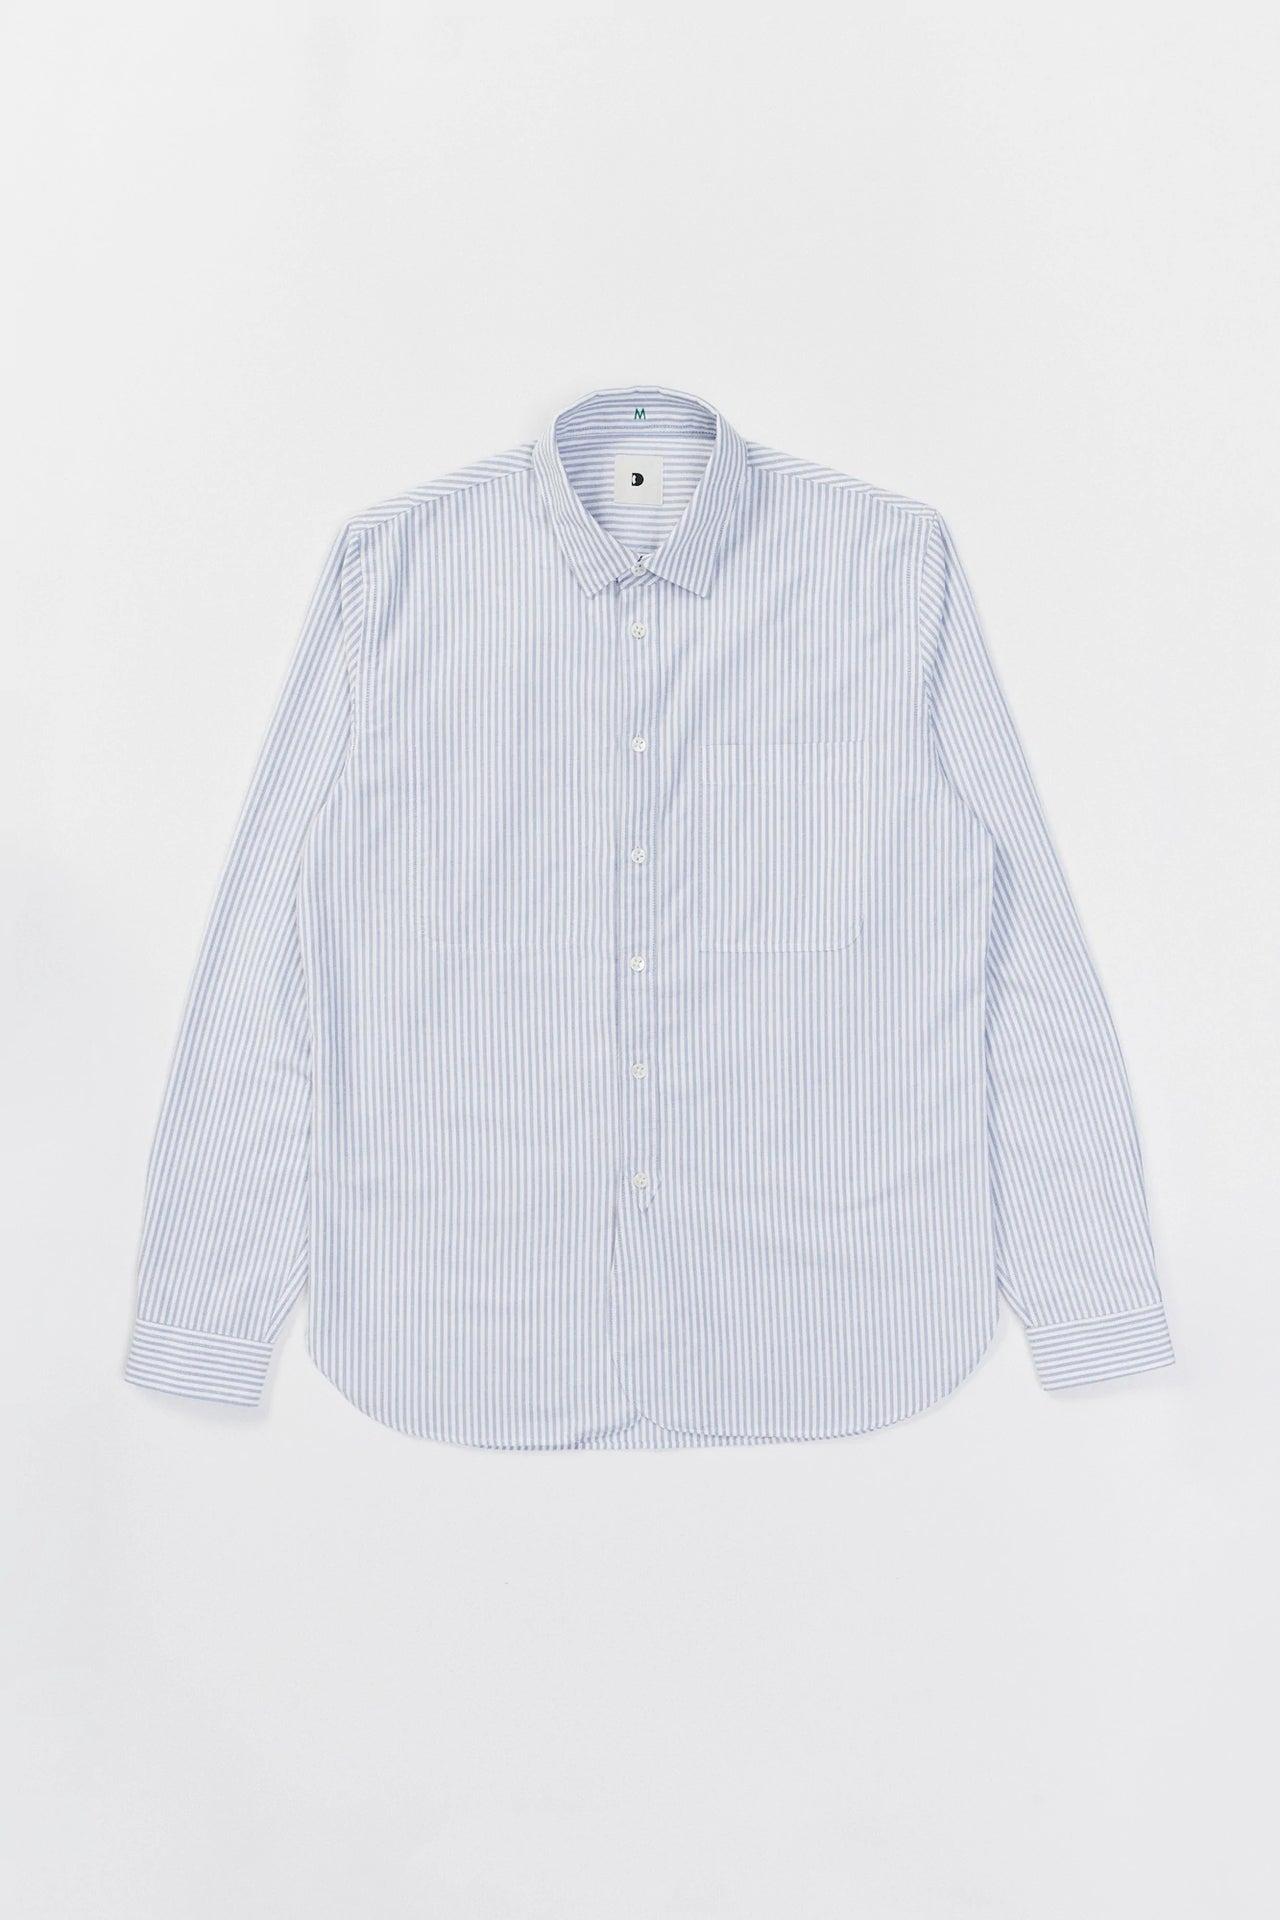 Blue Stripe Farmer Shirt in the Finest Brushed Portuguese Oxford Cotton